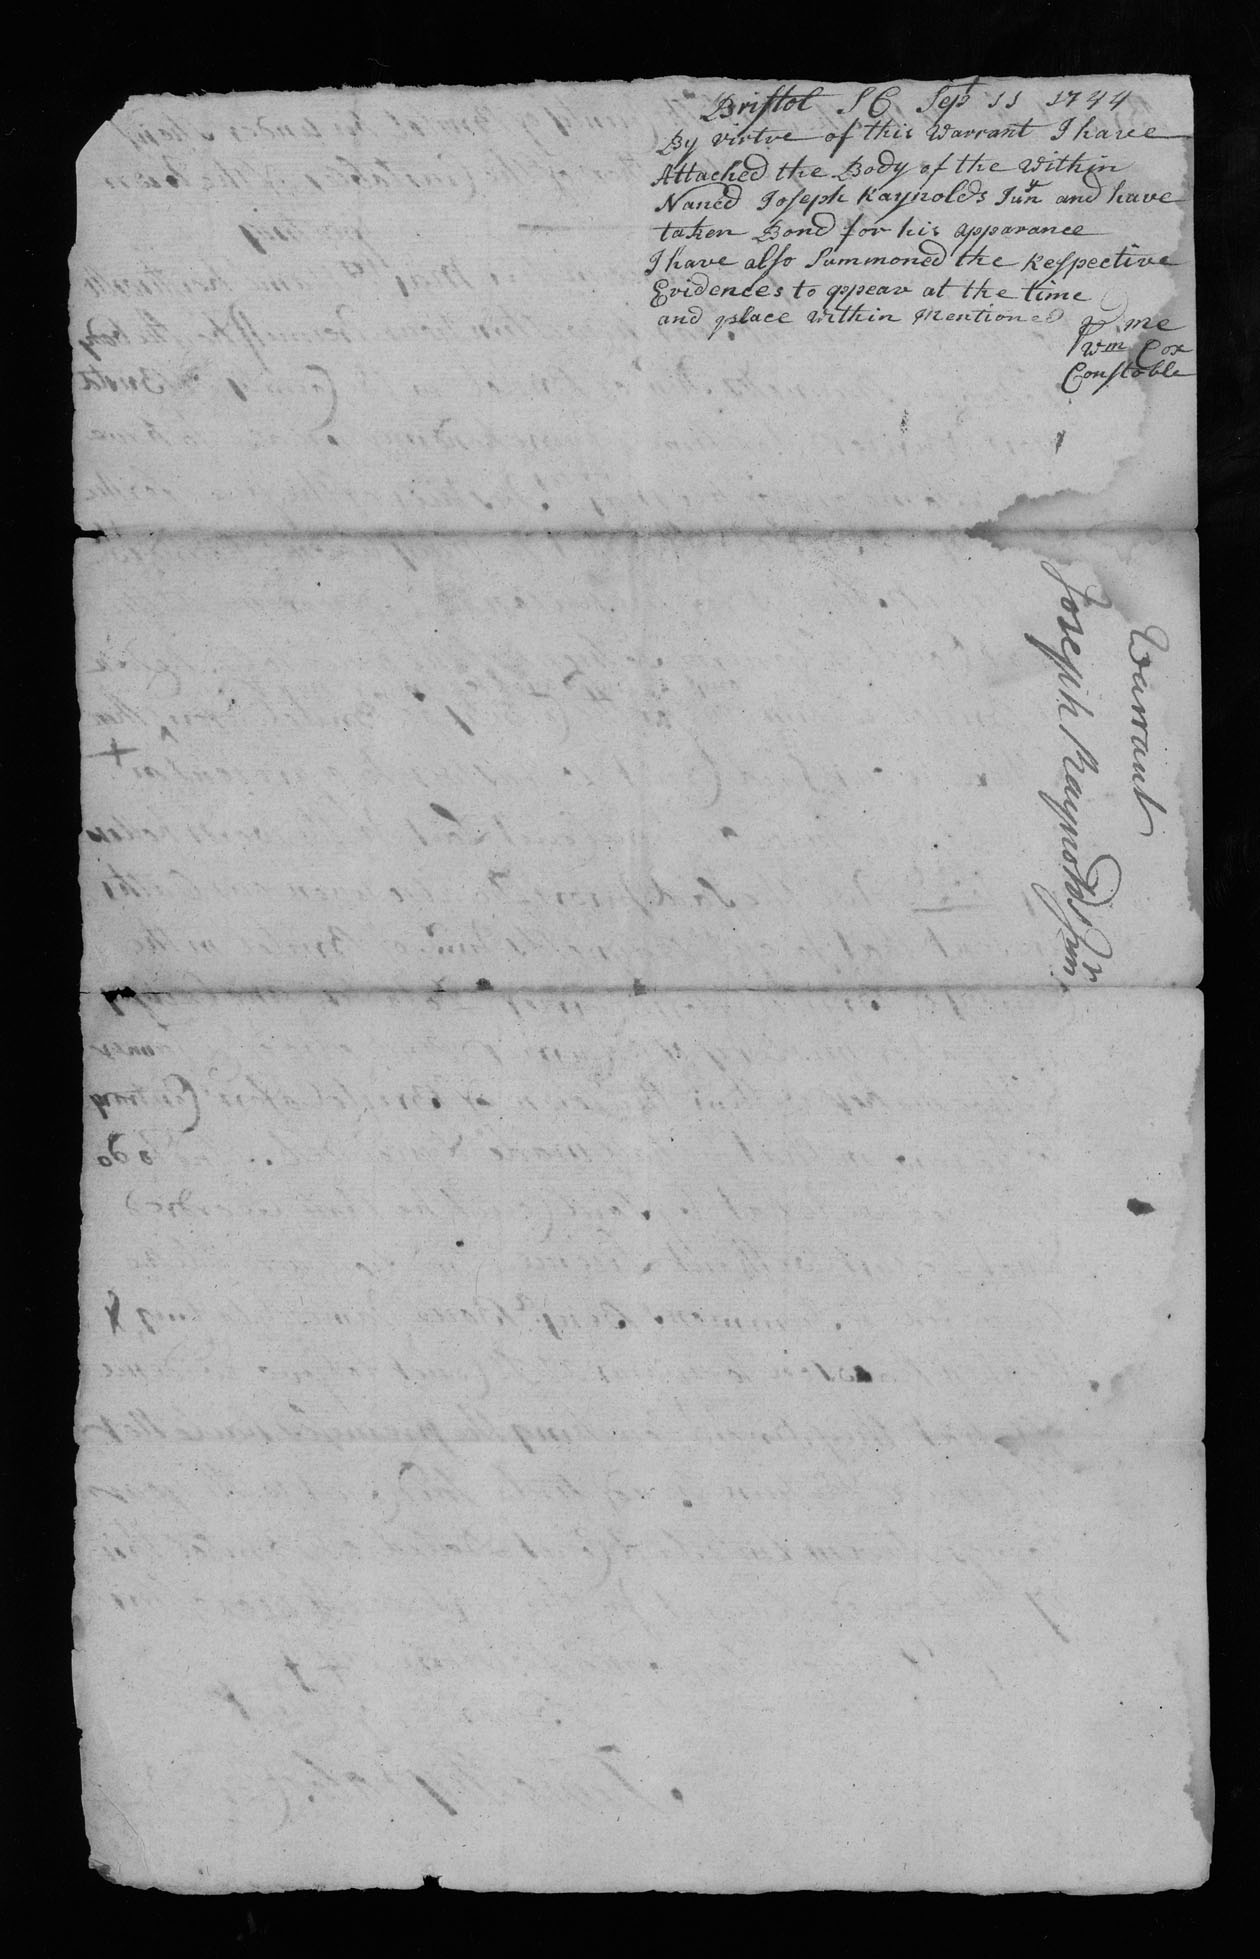 Timothy Fales, William Cox, "Warrant for the arrest of Joseph Raynolds, Jr.," Verso